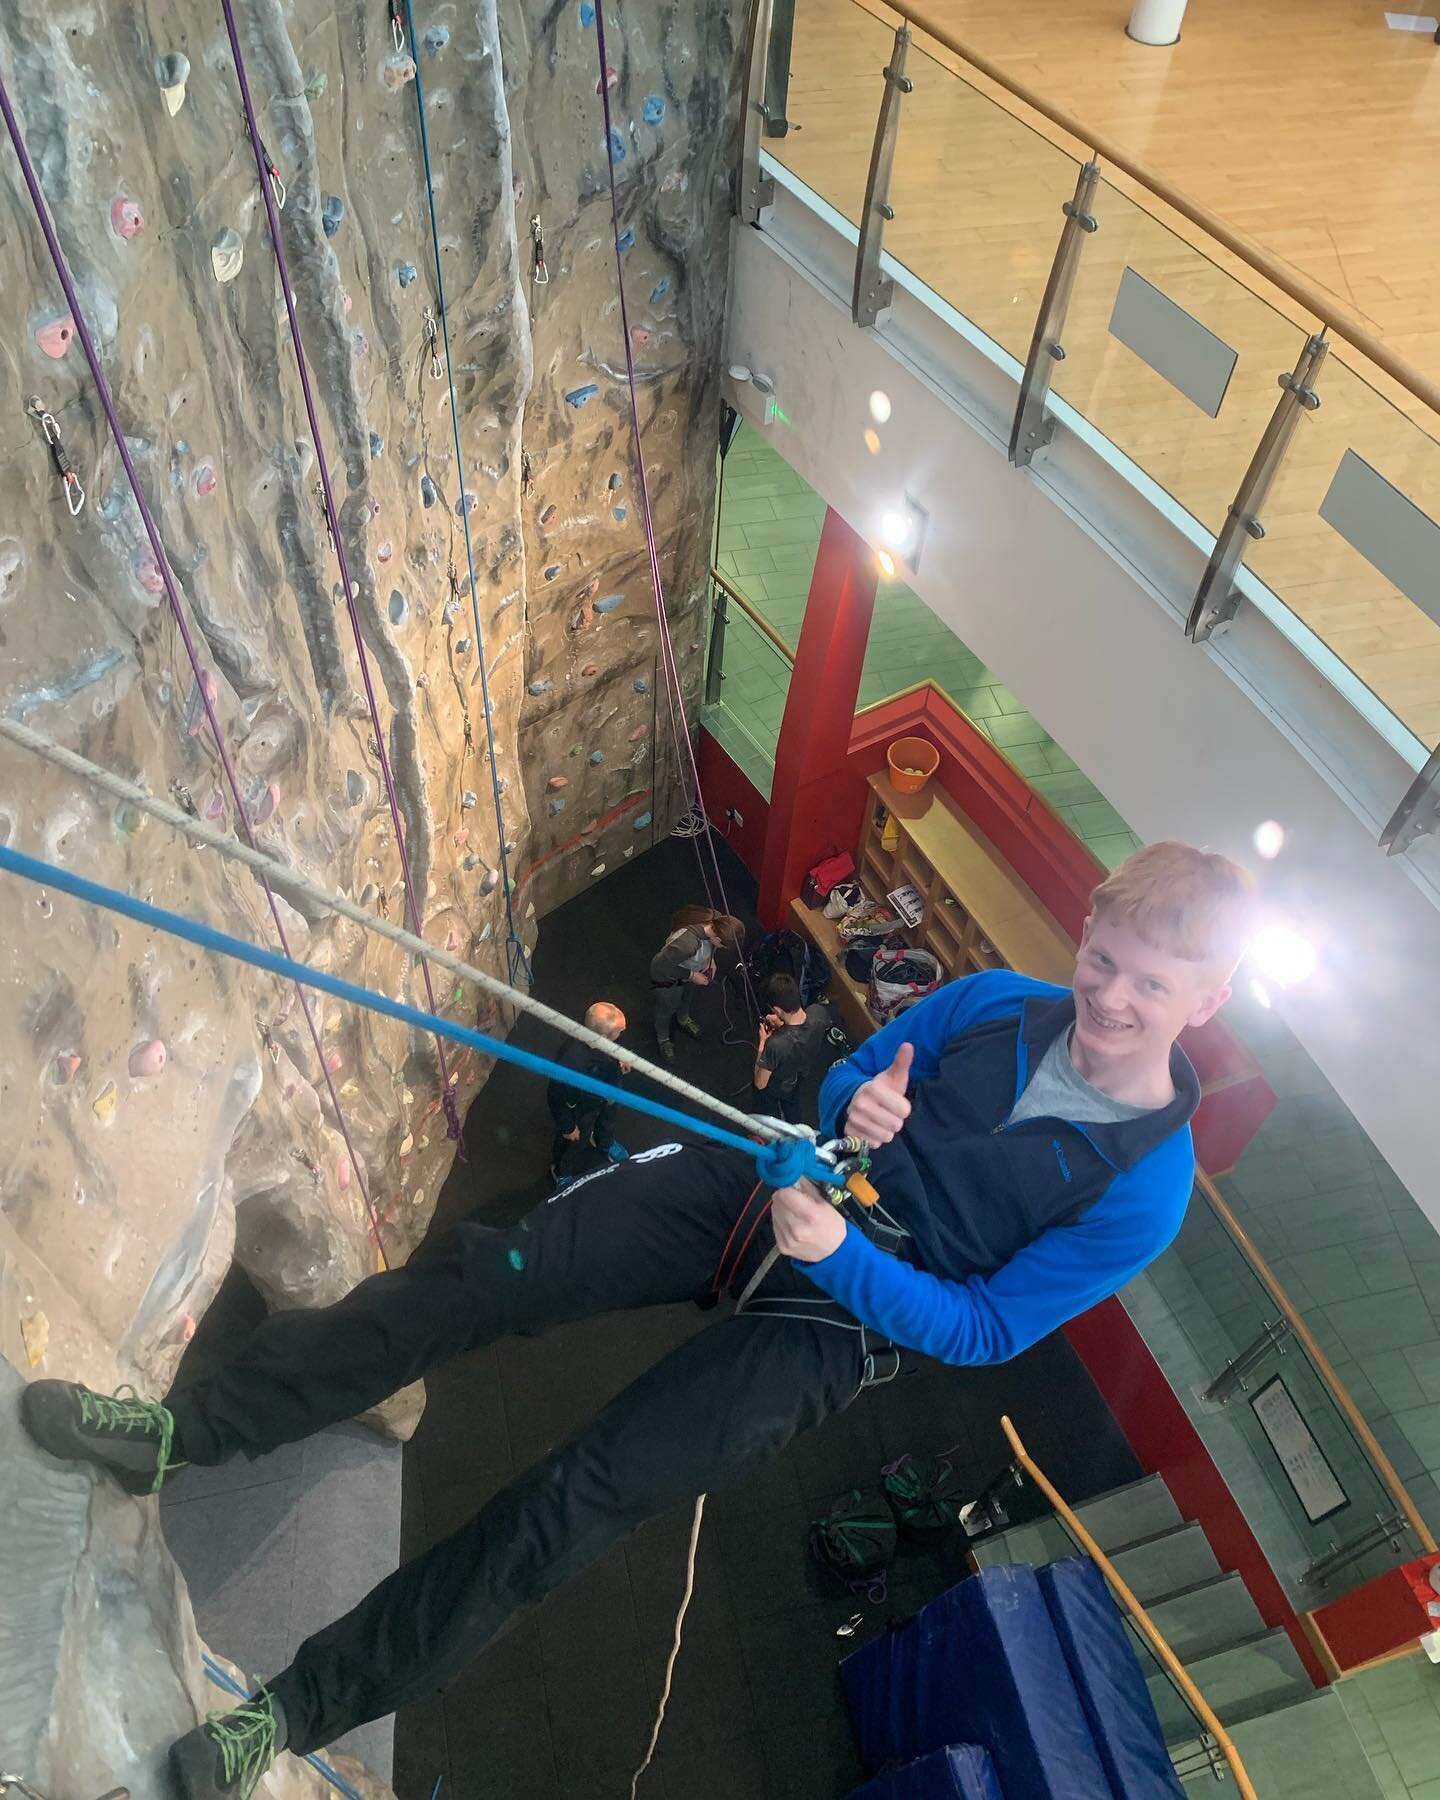 Almost at the end of our Explorer Scouts climbing sessions for their DofE sections.

Tonight we did some abseiling to mix it up a bit and for a bit of practice before we head outdoors.

#abseiling #climbing #climbinglife #rockclimbing #climbing_pictu